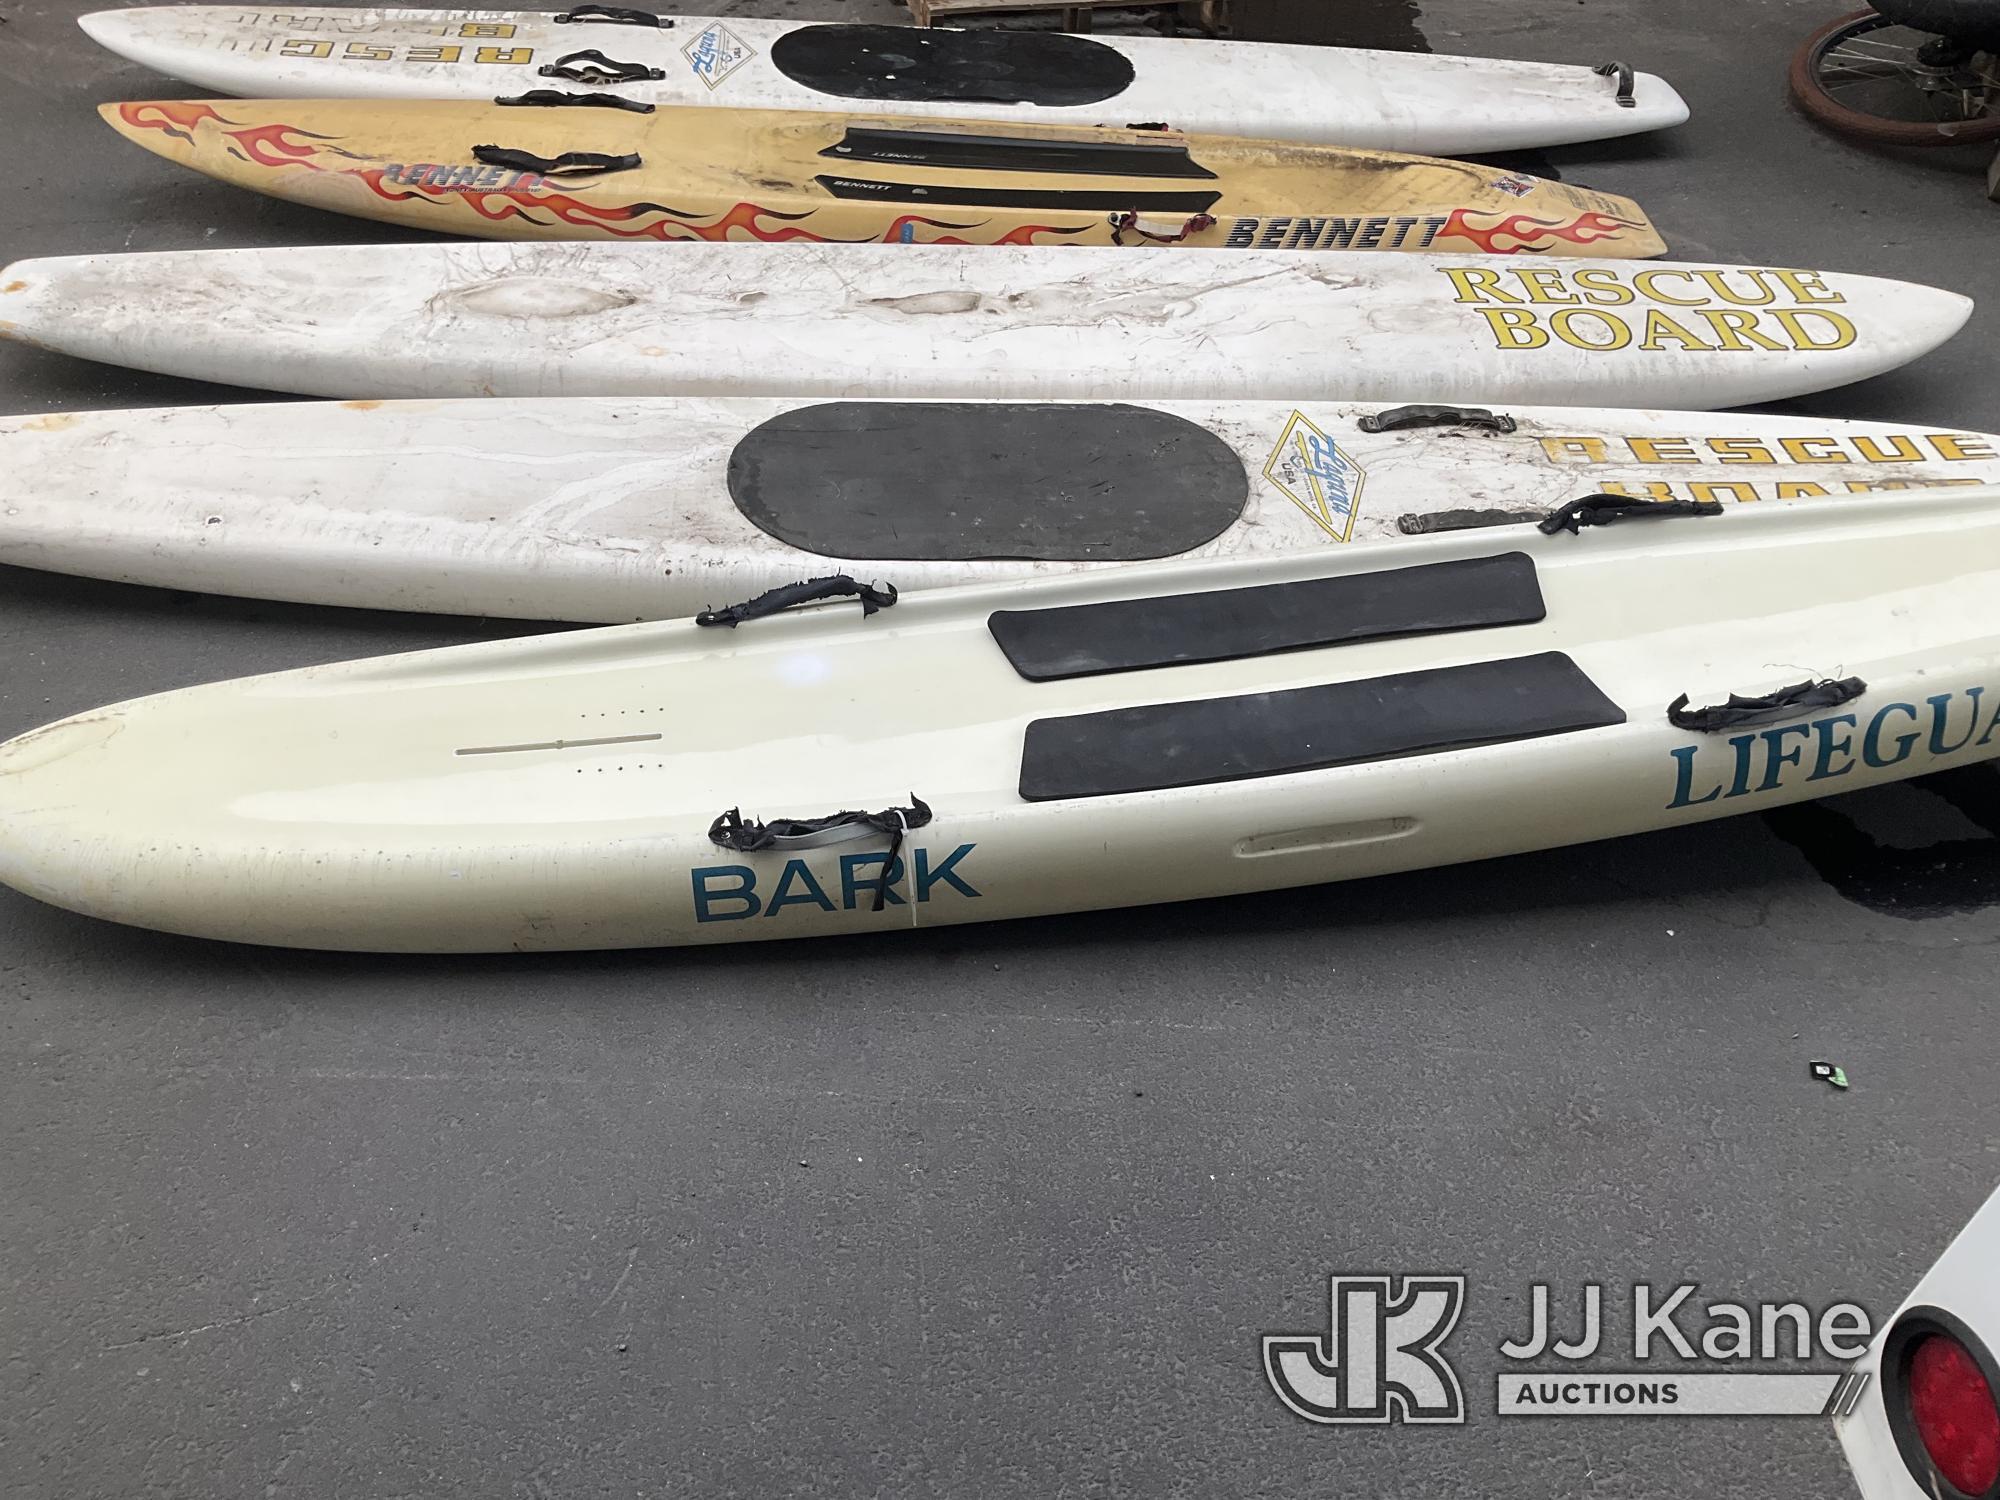 (Jurupa Valley, CA) 5 Paddle-boards / Surfboards (Used) NOTE: This unit is being sold AS IS/WHERE IS